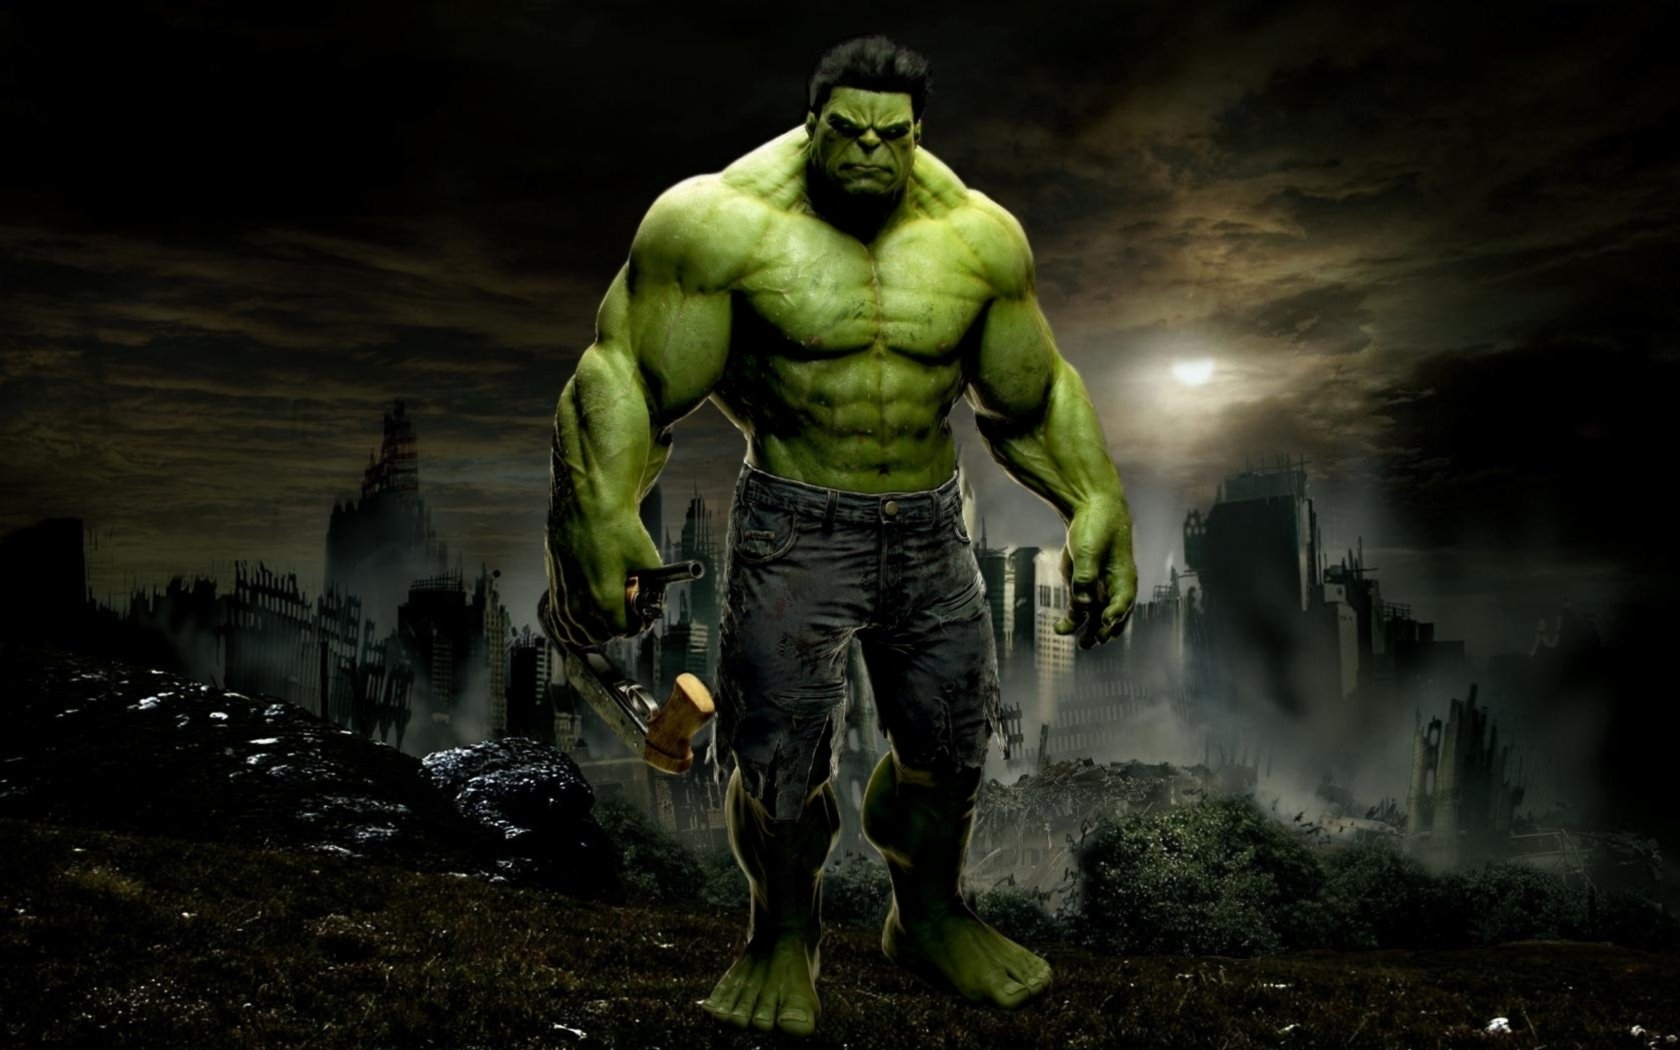  Hulk Images Hd Wallpapers And Backgrounds 19284 cute Wallpapers